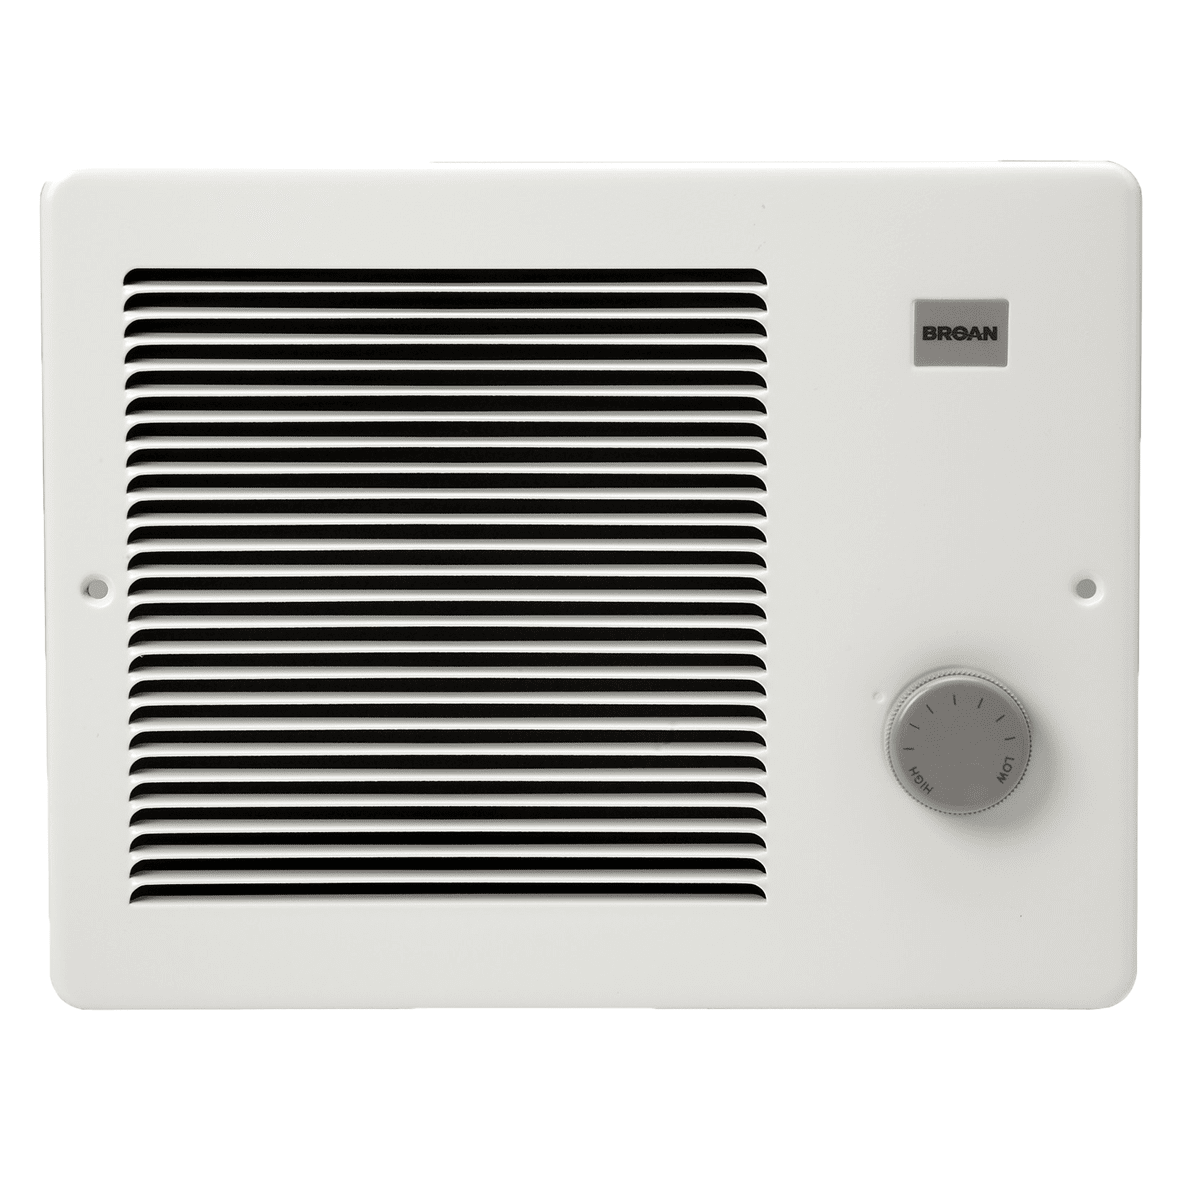 Broan 500/1000W Wall Heater w/ Built-In Thermostat